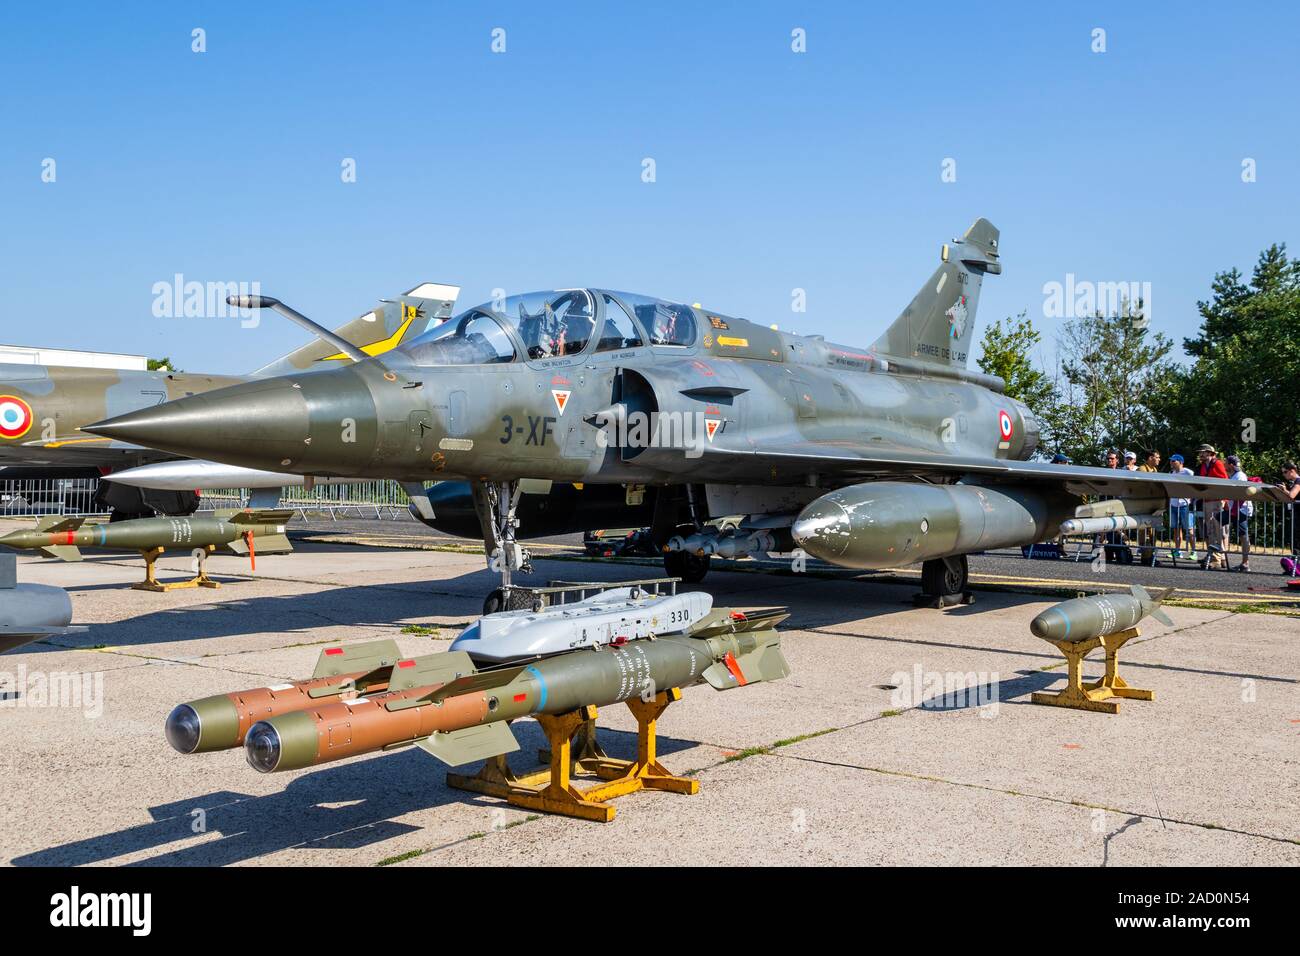 NANCY, FRANCE - JUL 1, 2018: French AIr Force Dassault Mirage 2000 bomber jet plane on display at Nancy Airbase. Stock Photo